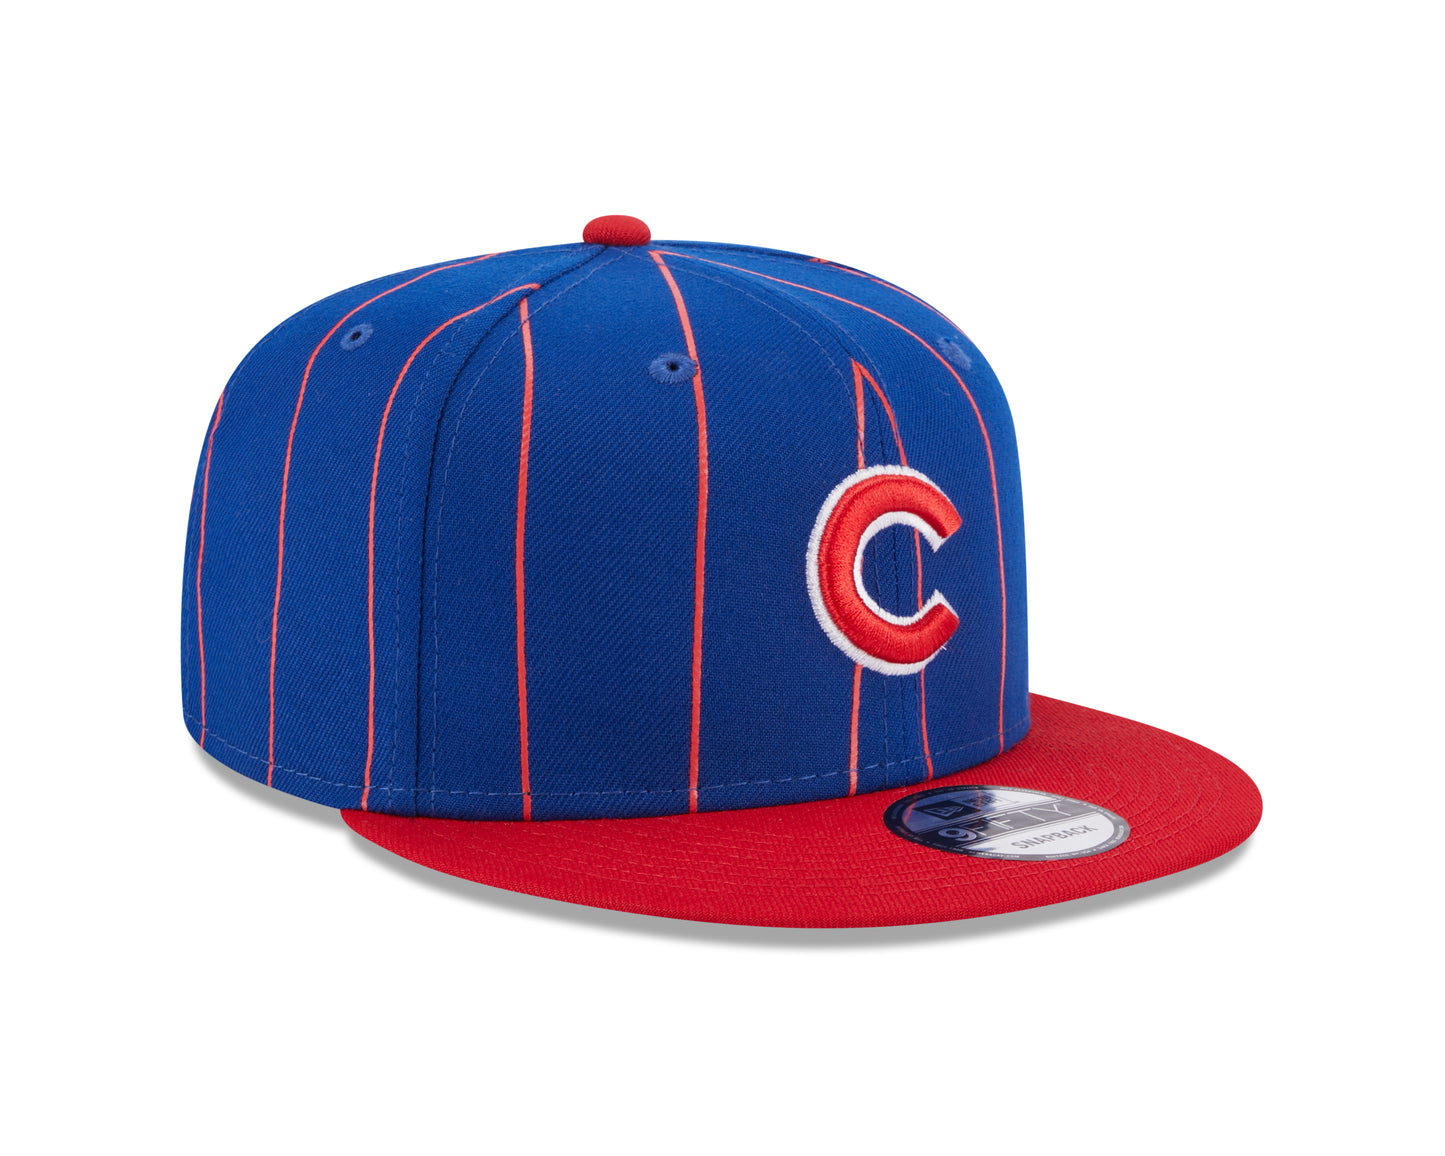 Chicago Cubs Primary Logo Royal/Red Vintage New Era 9FIFTY Snapback Hat